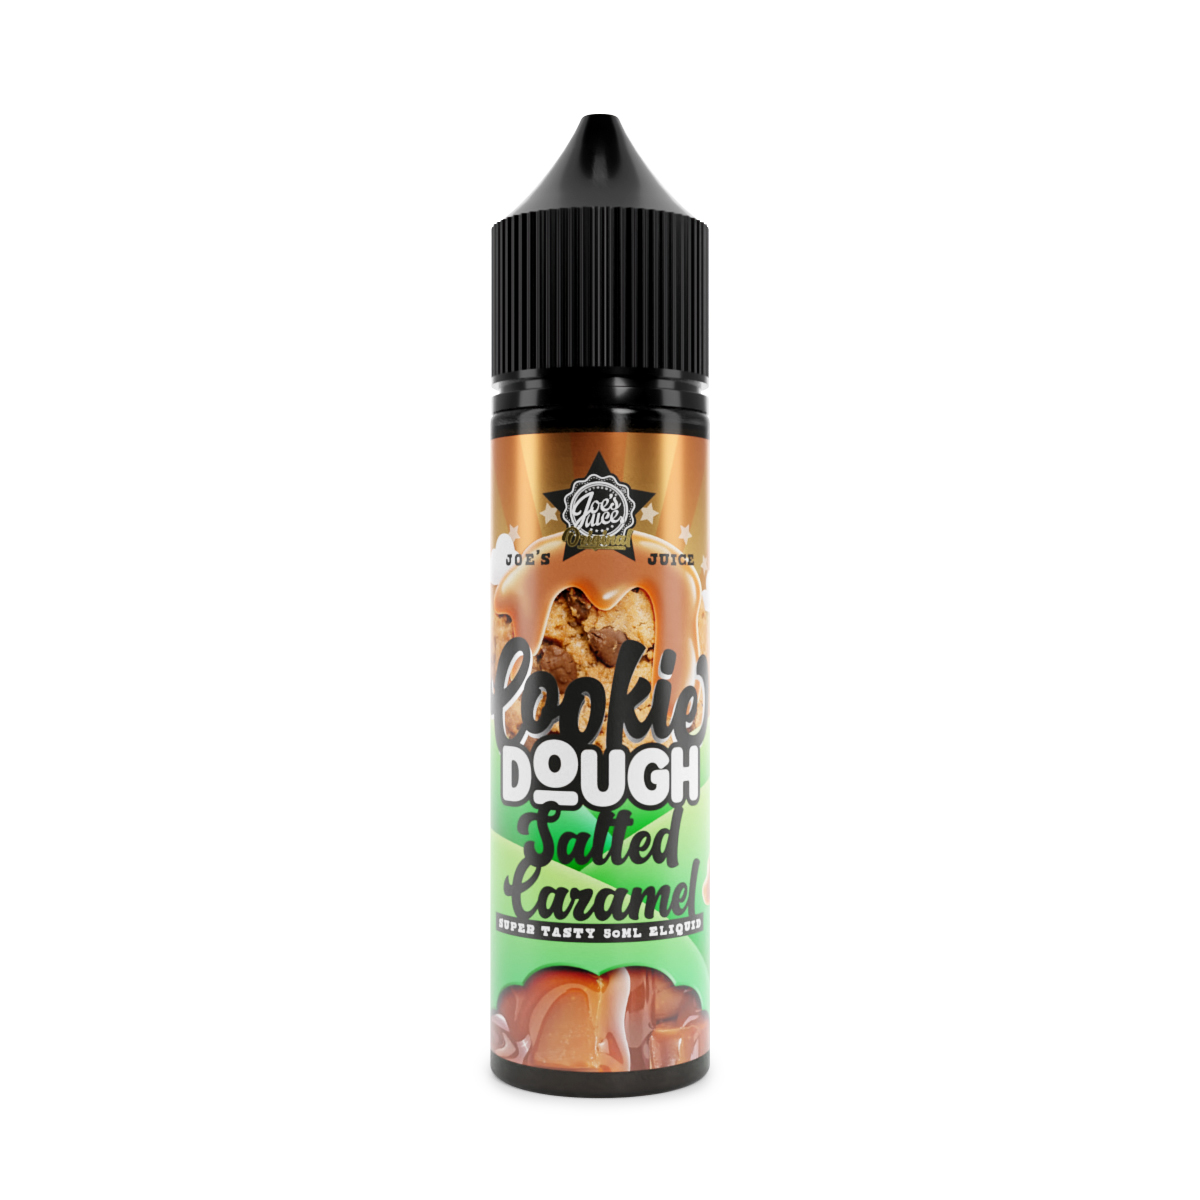 Salted Caramel Cookie Dough Flavour Concentrate by Joe's Juice